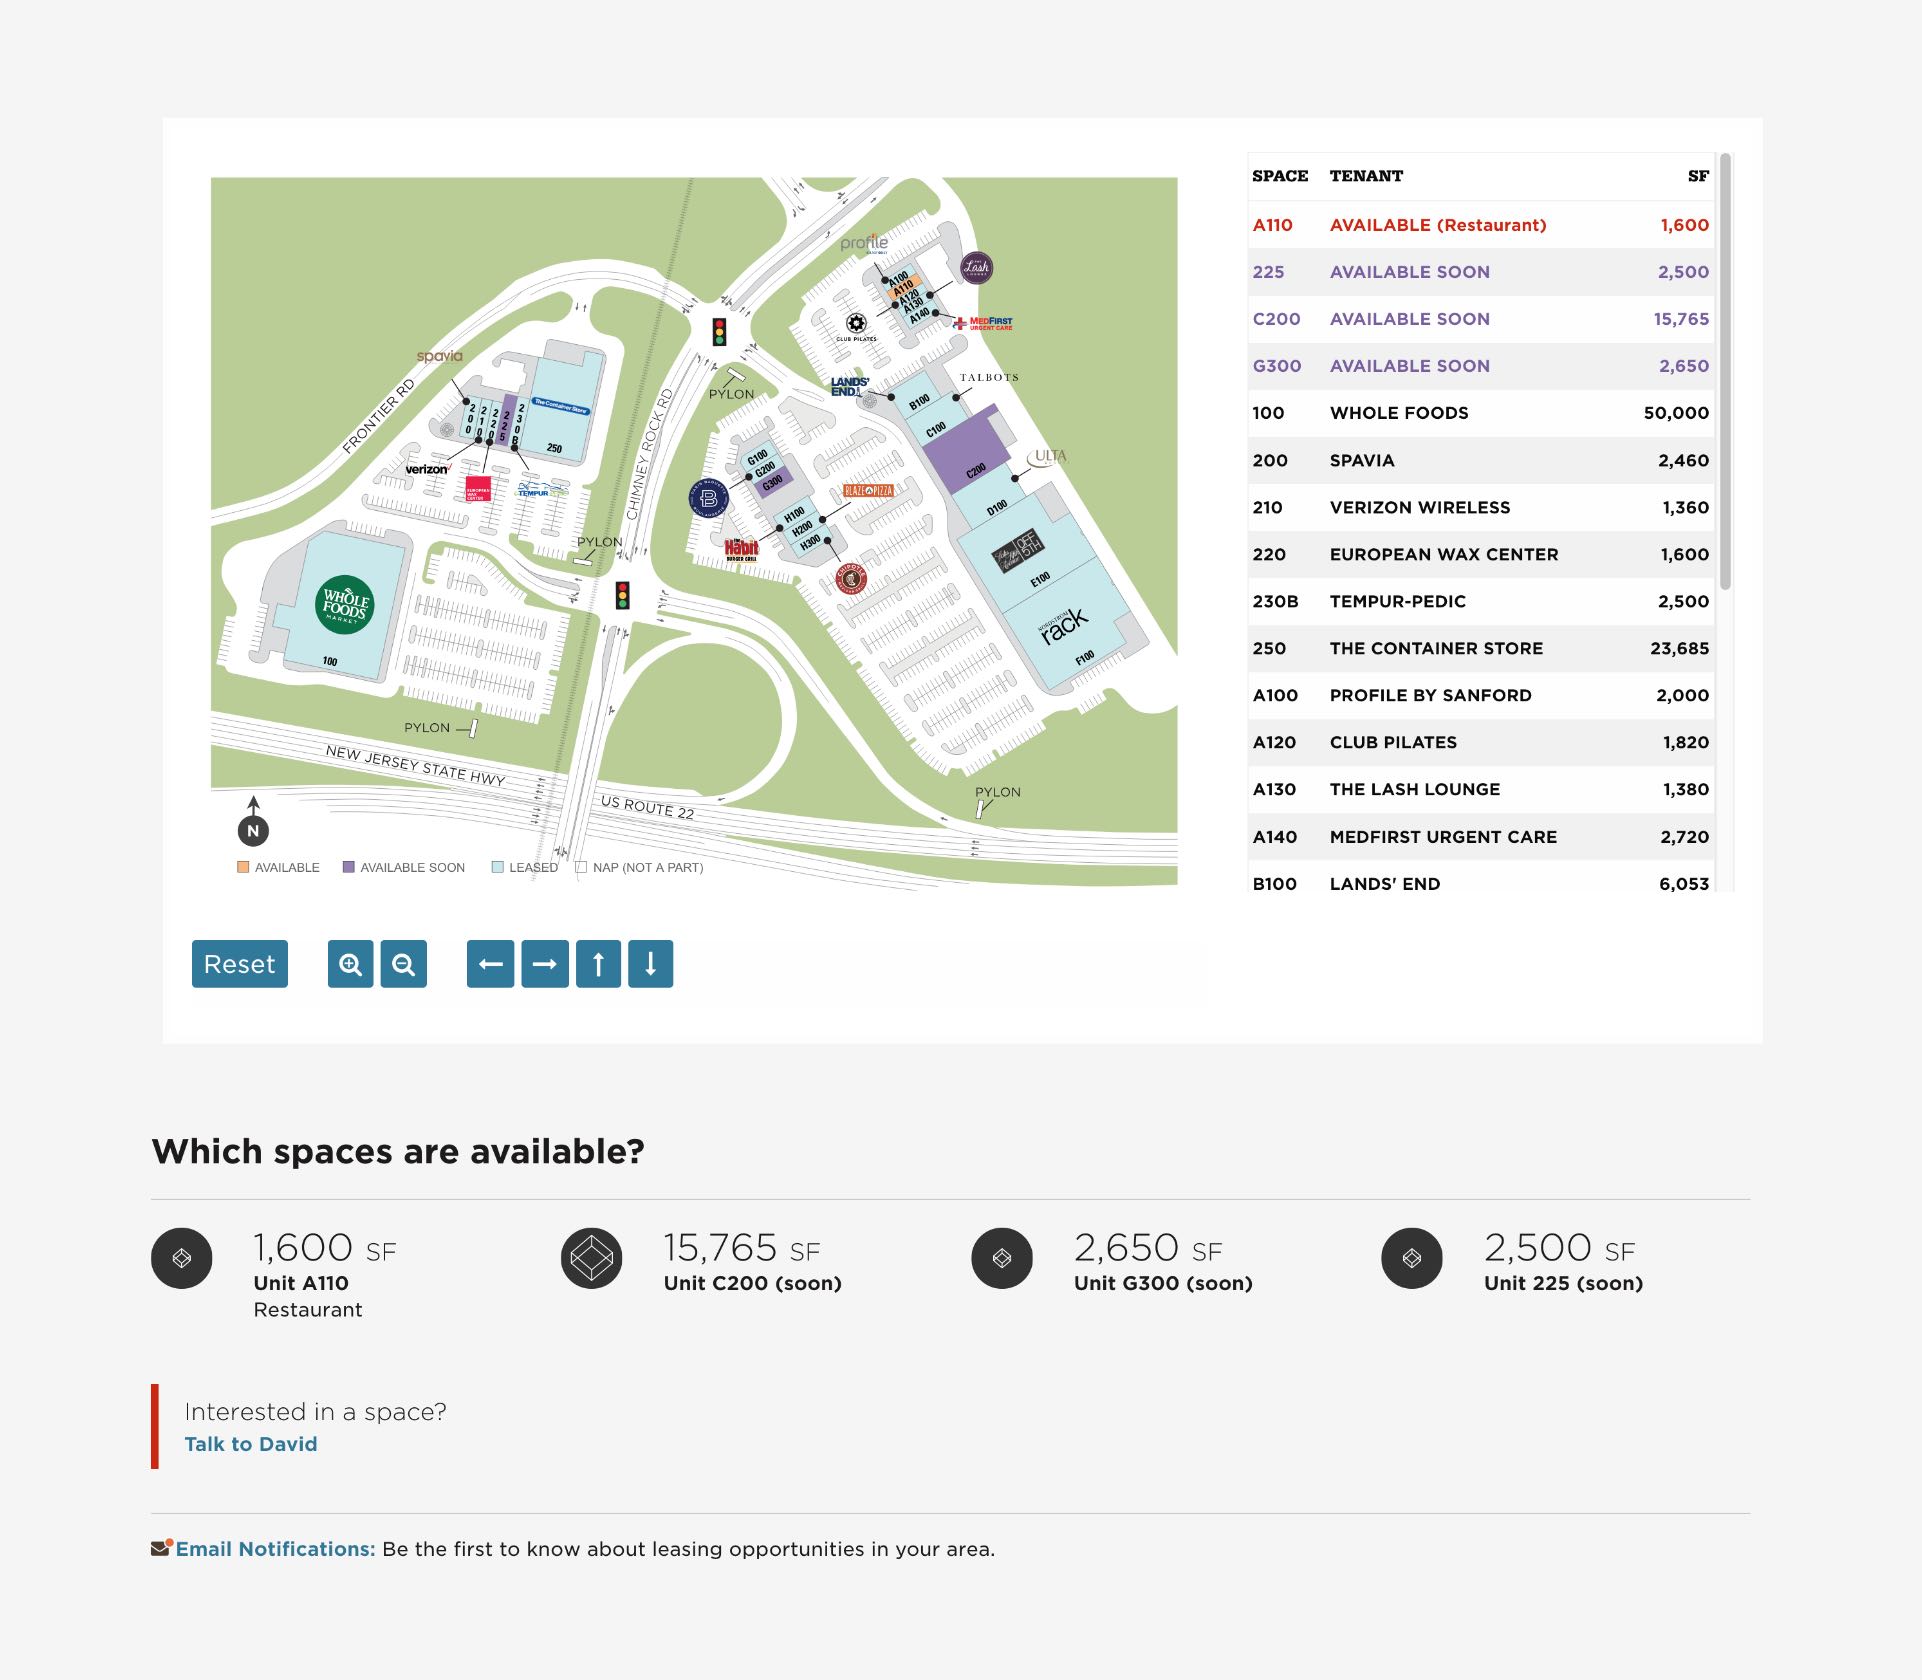 Property map showing the street and surrounding locations. To the right, a table of information provides spaces available, tenant, and square footage. Below, a section showing what spaces are available ending with a link to contact the leasing agent.